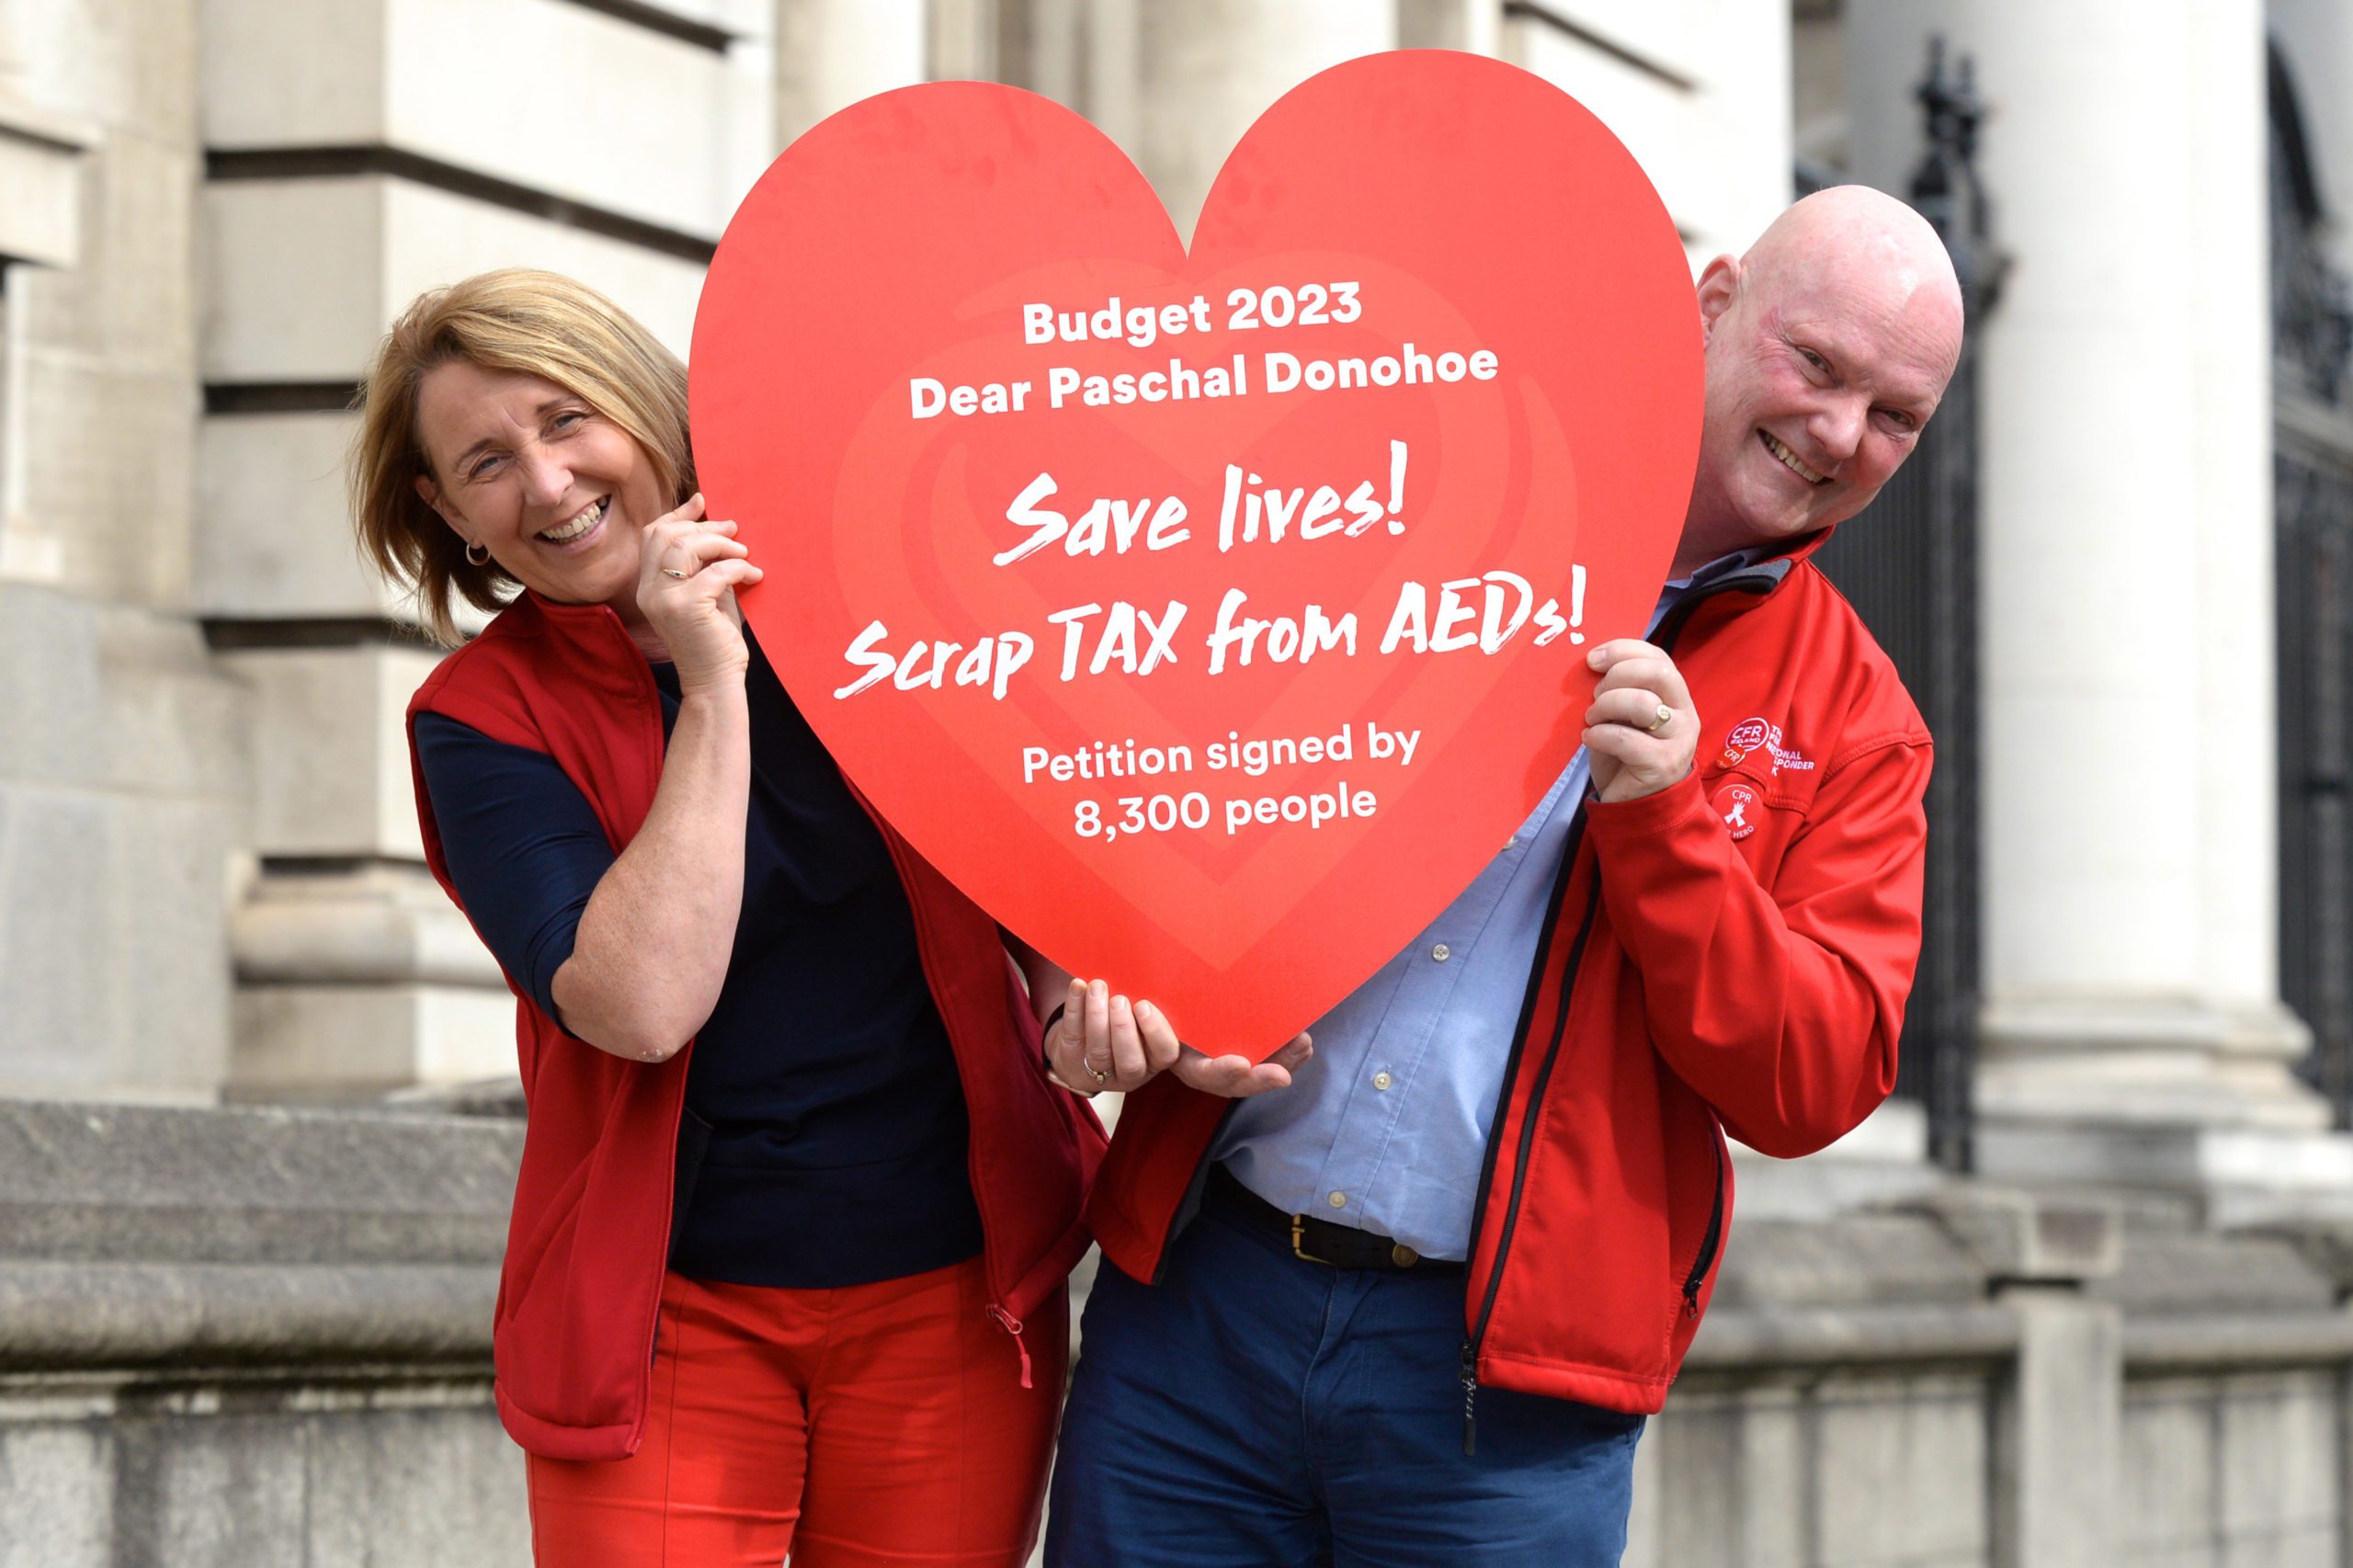 DEFIB TAX ‘MUST BE SCRAPPED IN THE BUDGET’ CLAIMS CHARITY